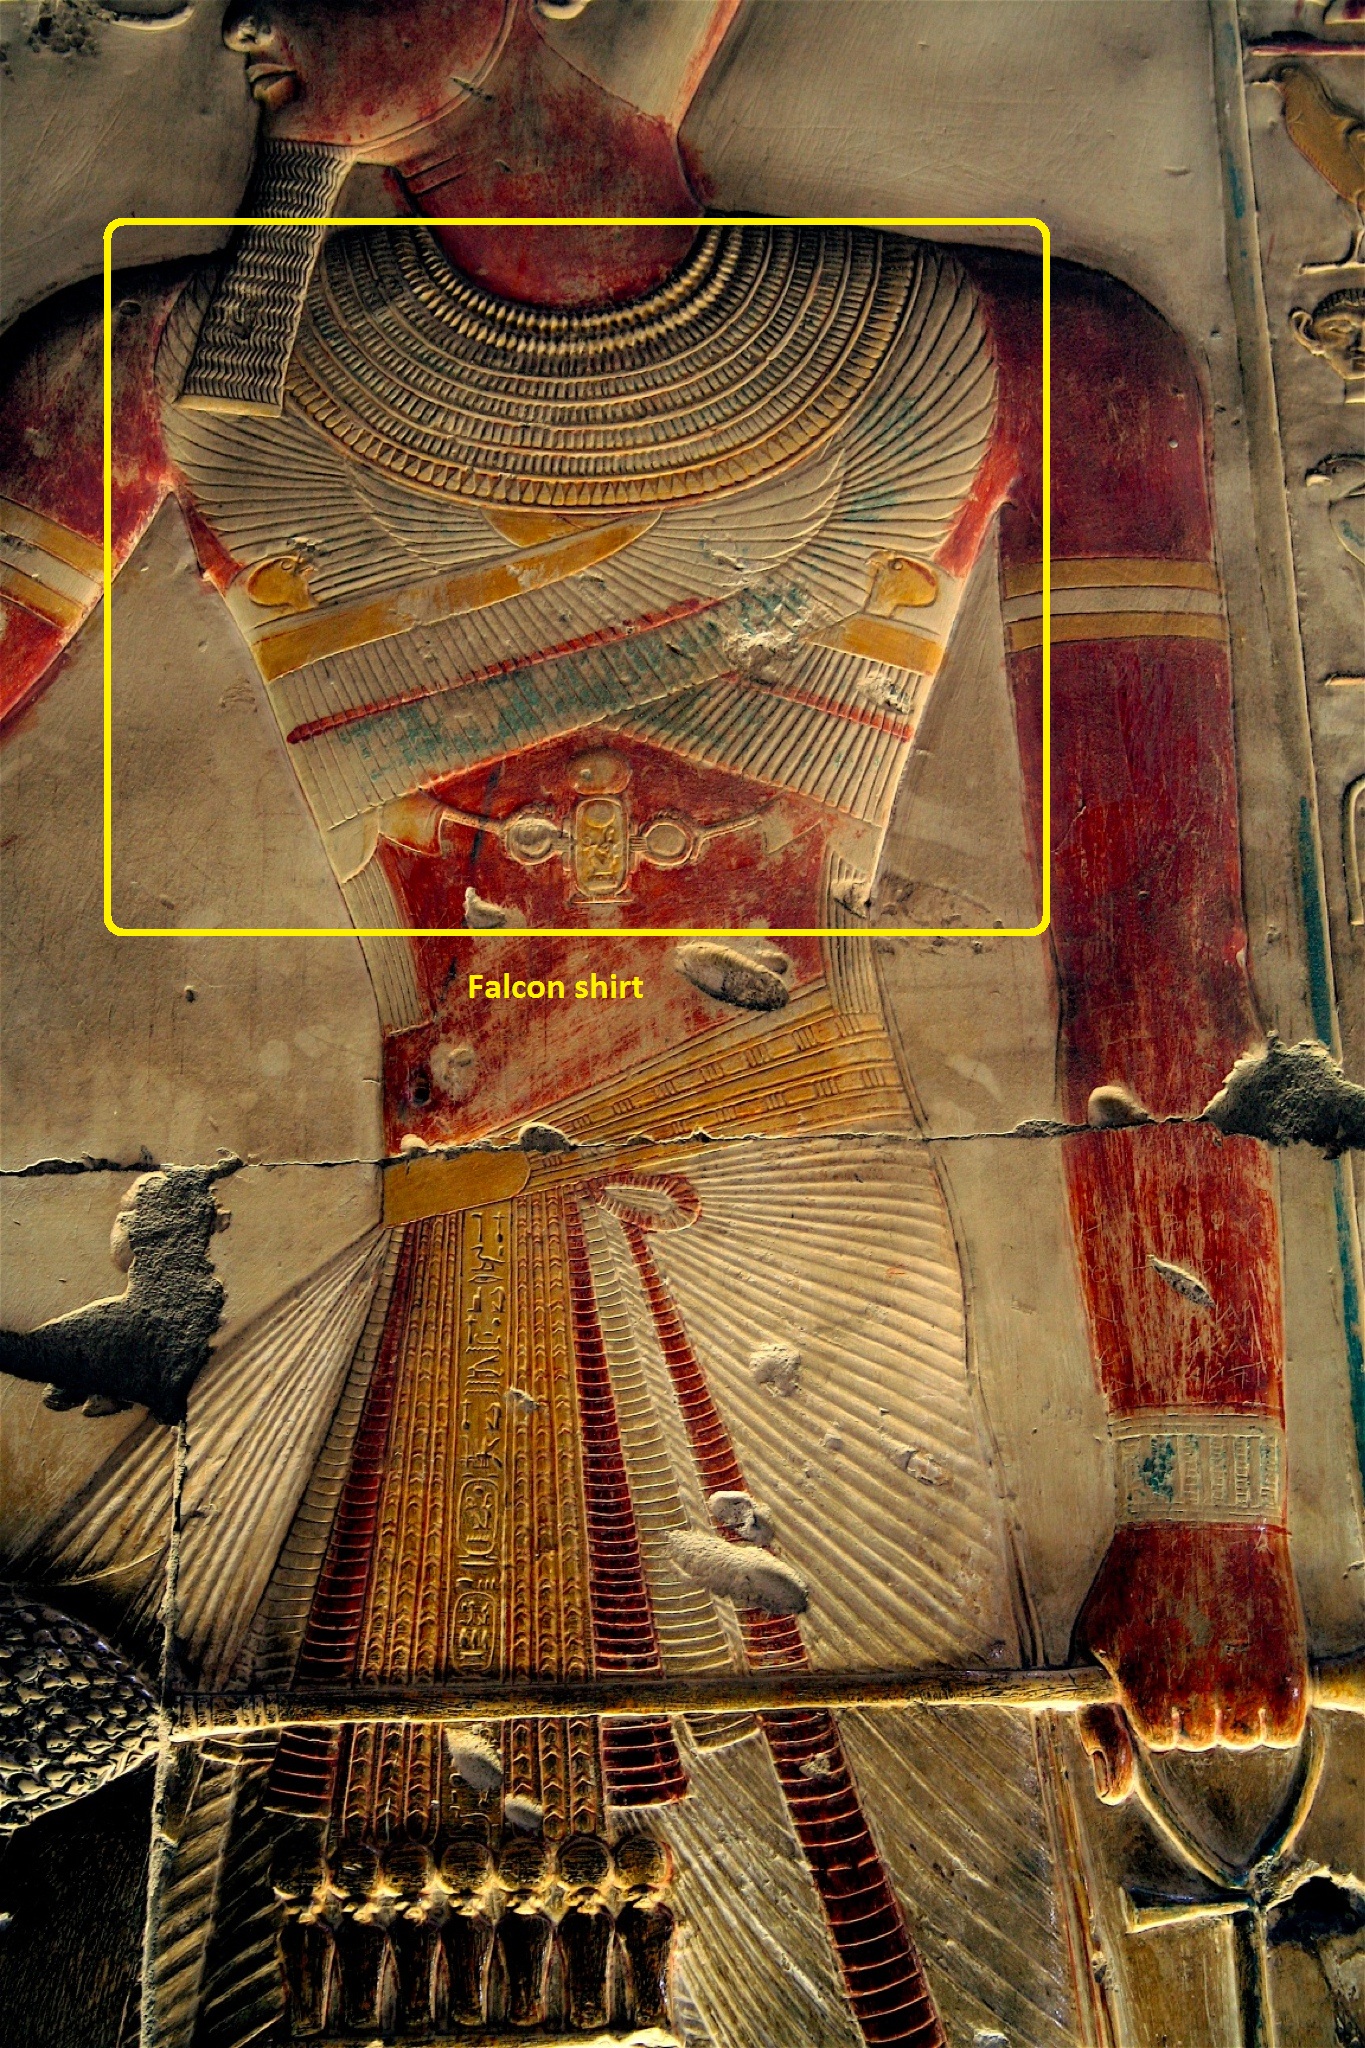 Variable of the Day, Ancient Egypt: Falcon shirt